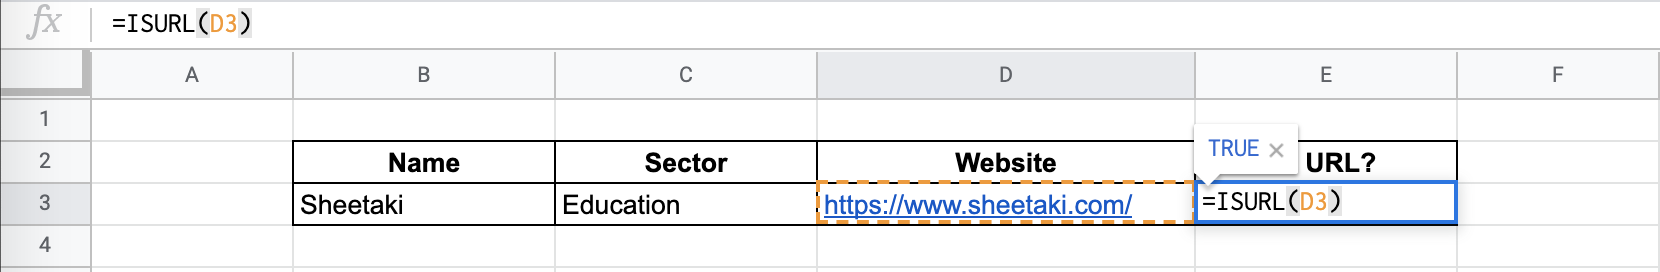 How to Use ISURL Function in Google Sheets